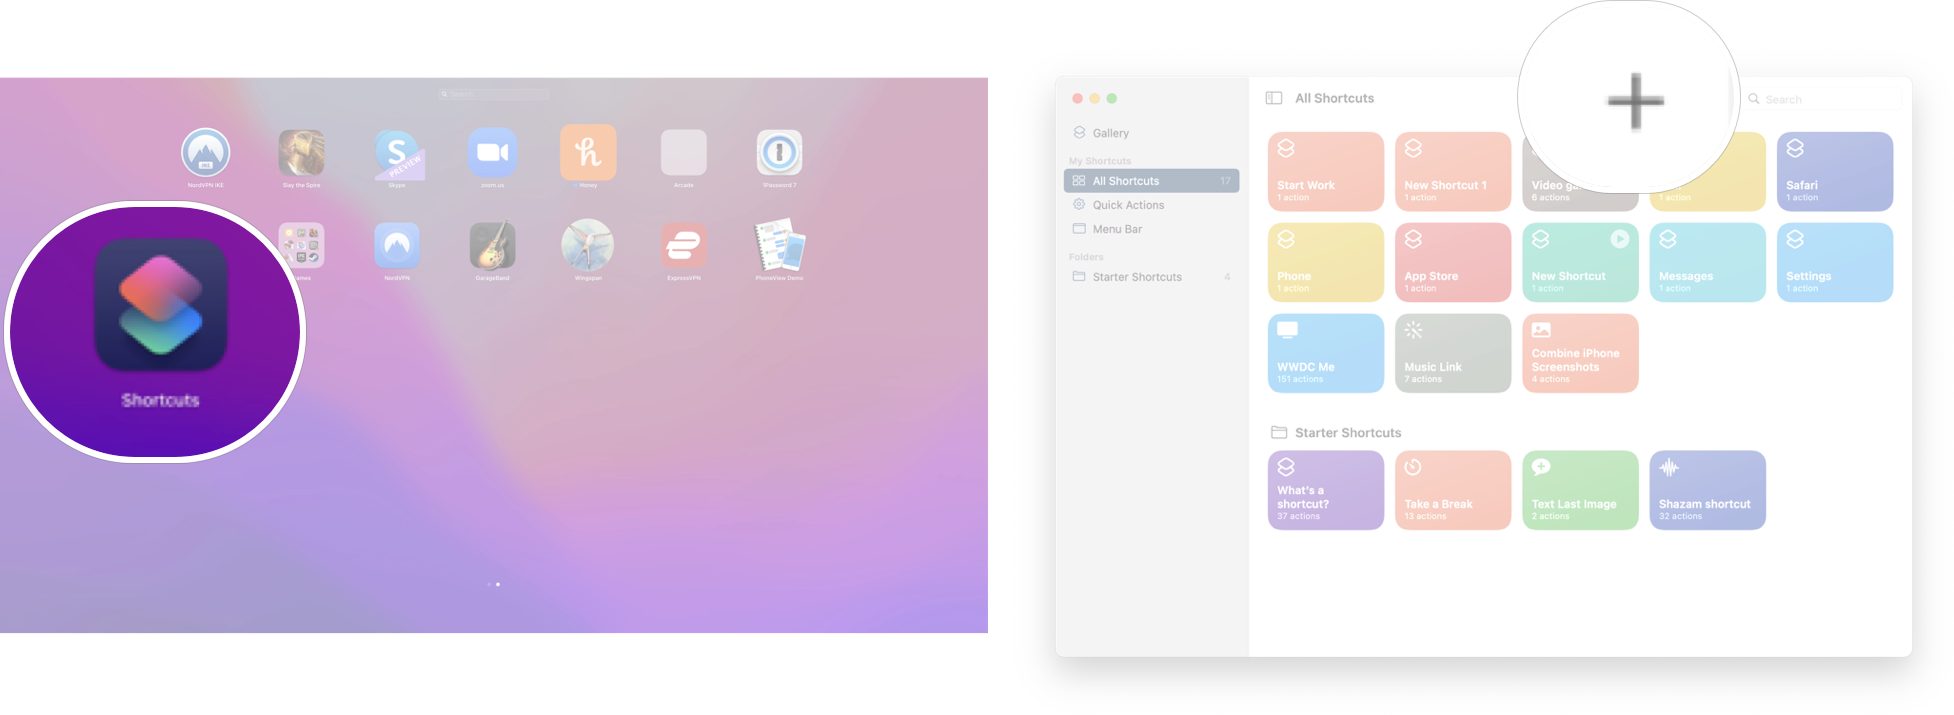 Creating New Shortcut In macOS Monterey: Launch the Shortcuts app and then click new shortcut.